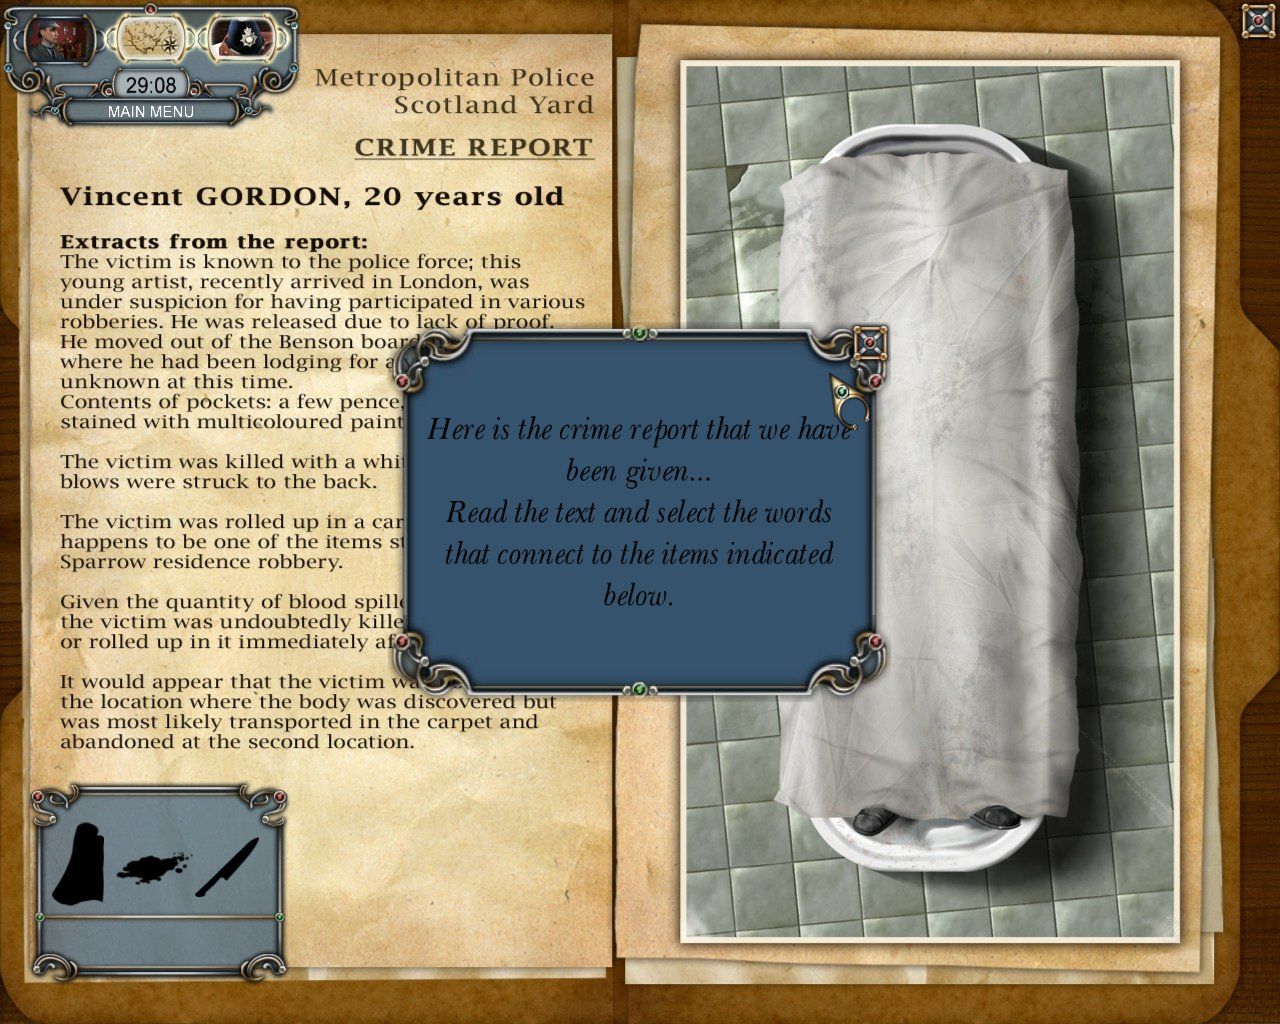 Adventures of Sherlock Holmes: The Mystery of the Persian Carpet - screenshot 6